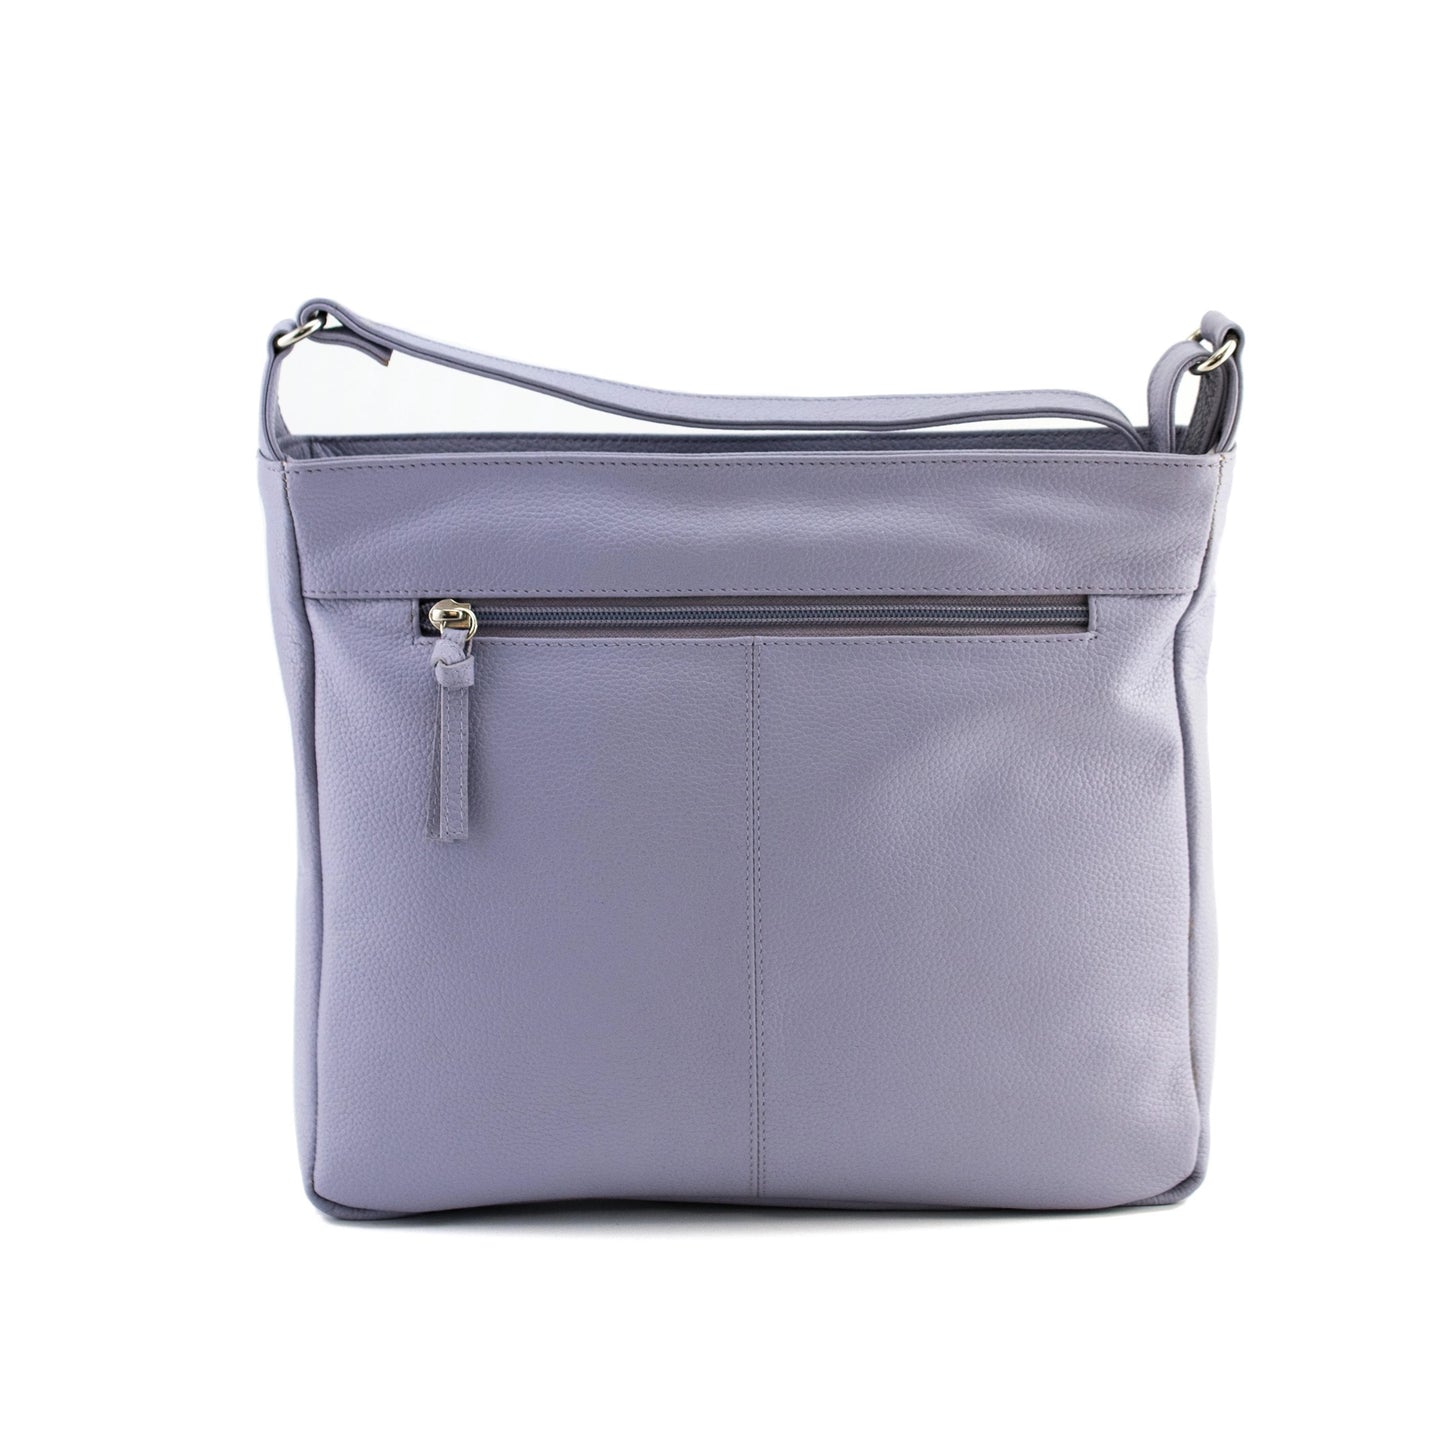 The Cotswold Cross Body Leather Bag